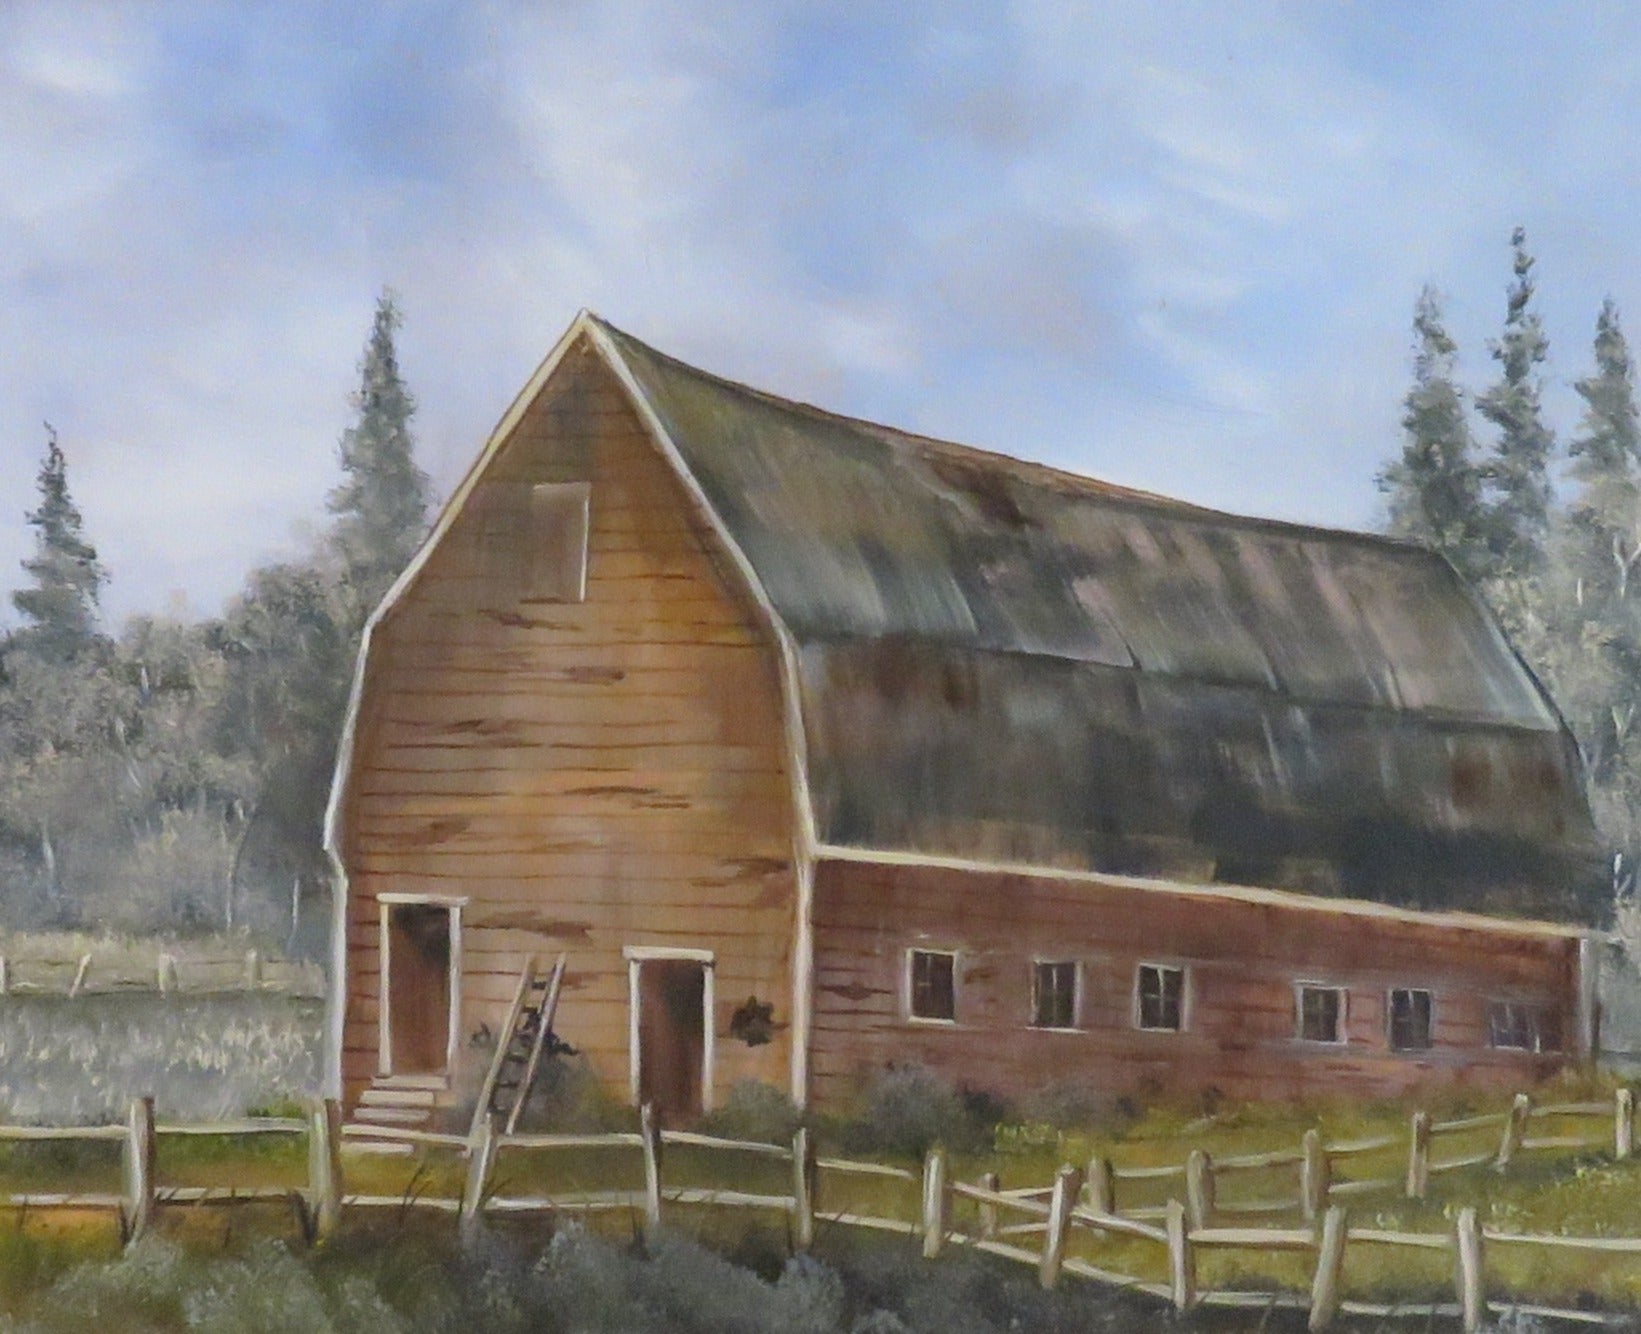 'Midwest Barn' Original Oil Painting